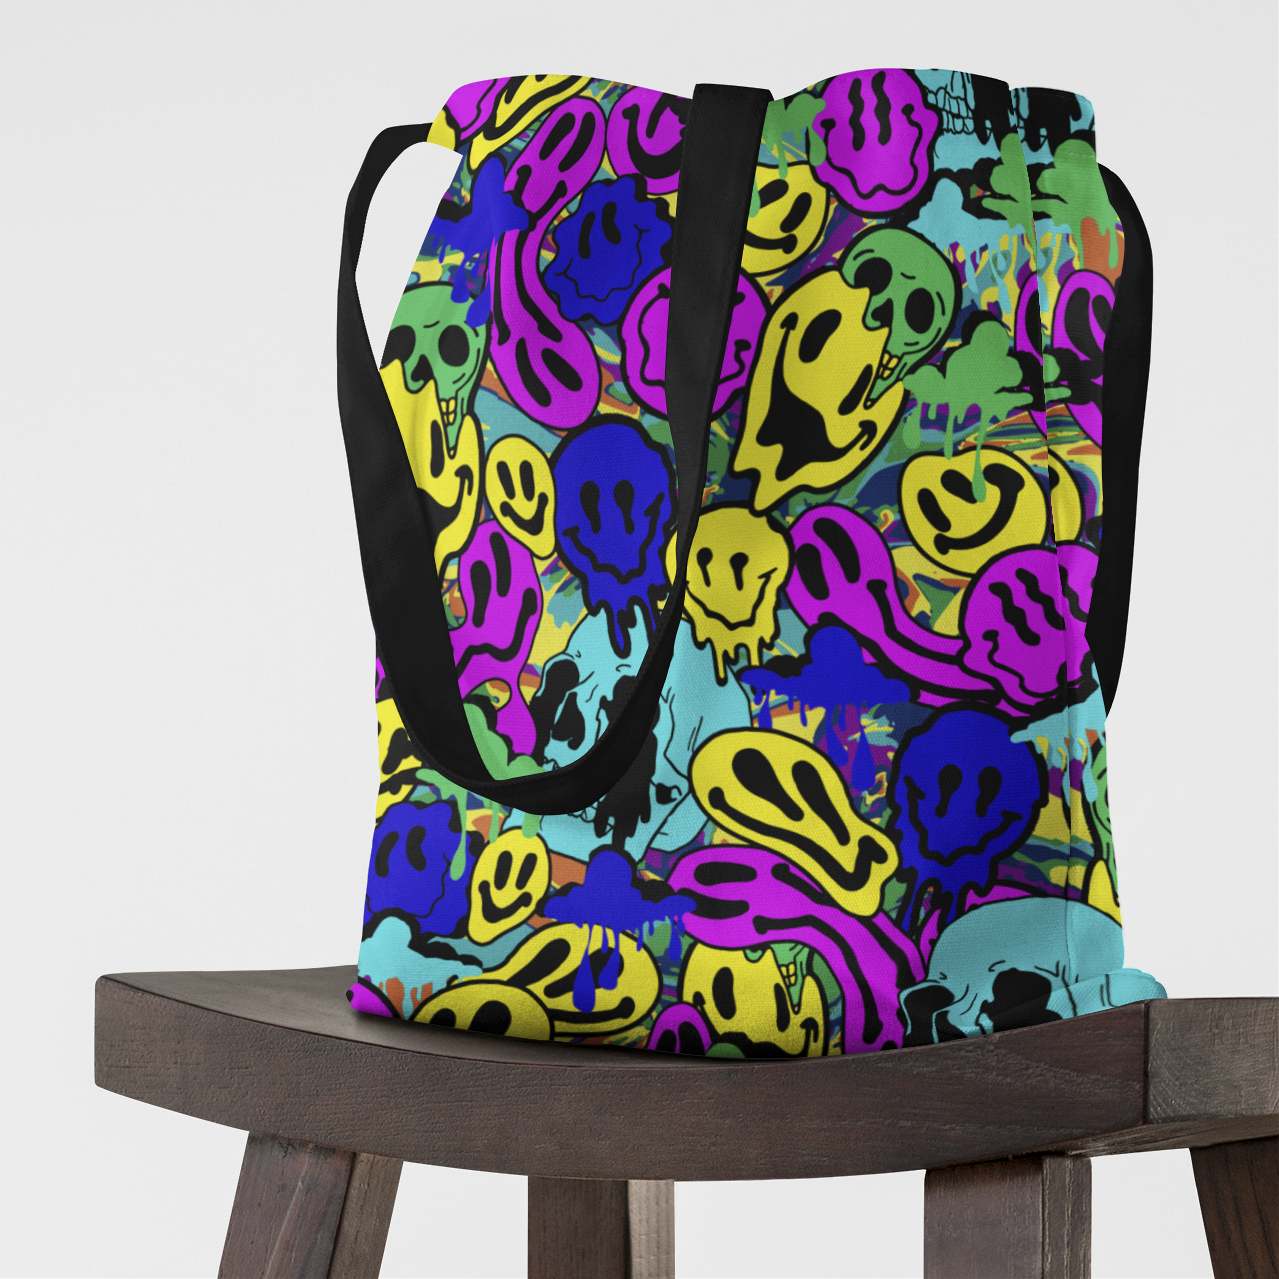 Melted Neon Smiley Print Tote Bag in Blue